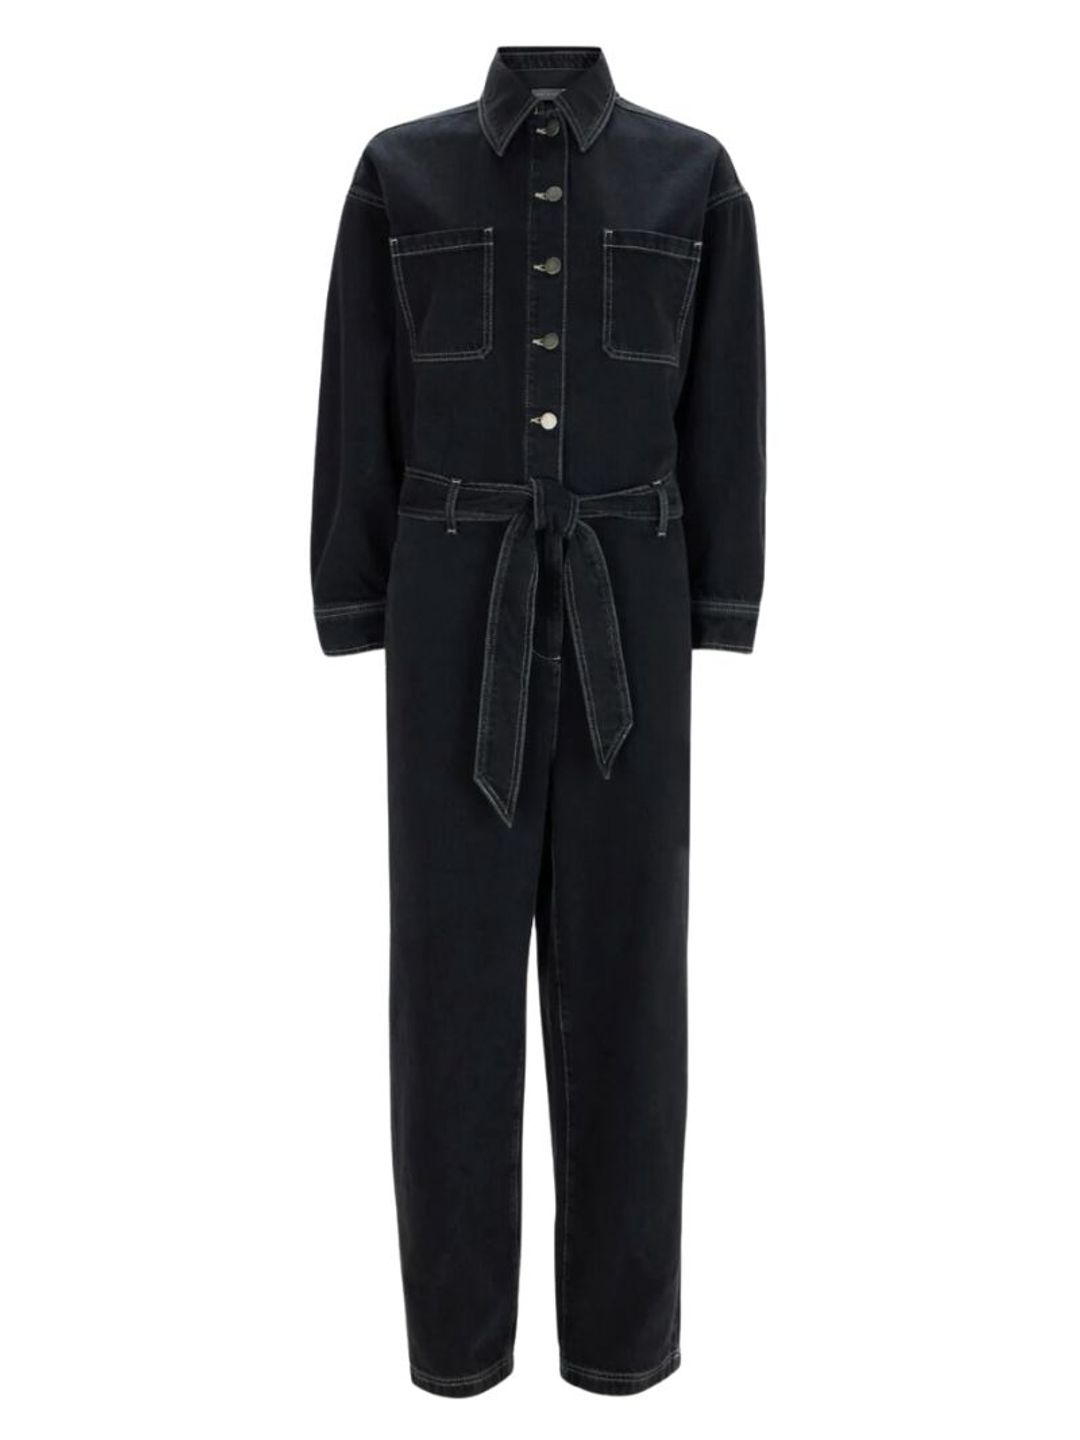 The 10 best denim jumpsuits to wear on rotation this season | HELLO!